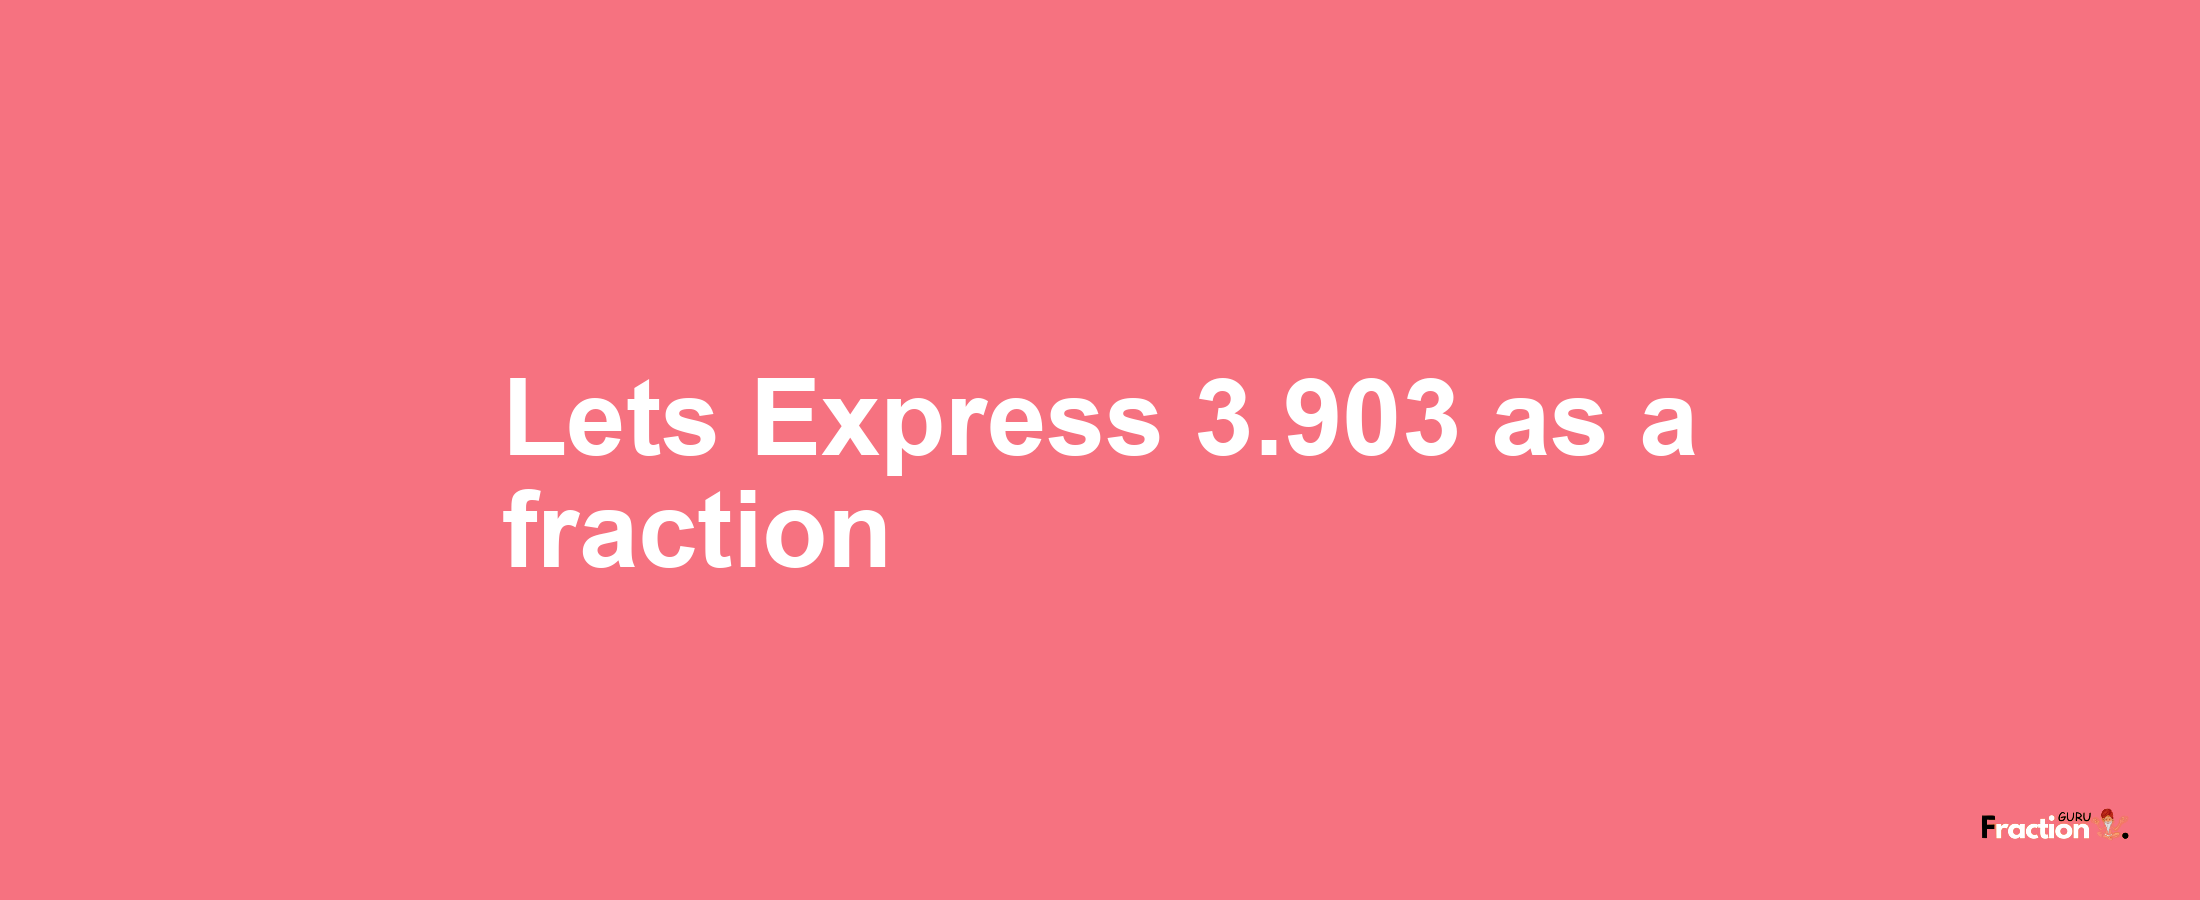 Lets Express 3.903 as afraction